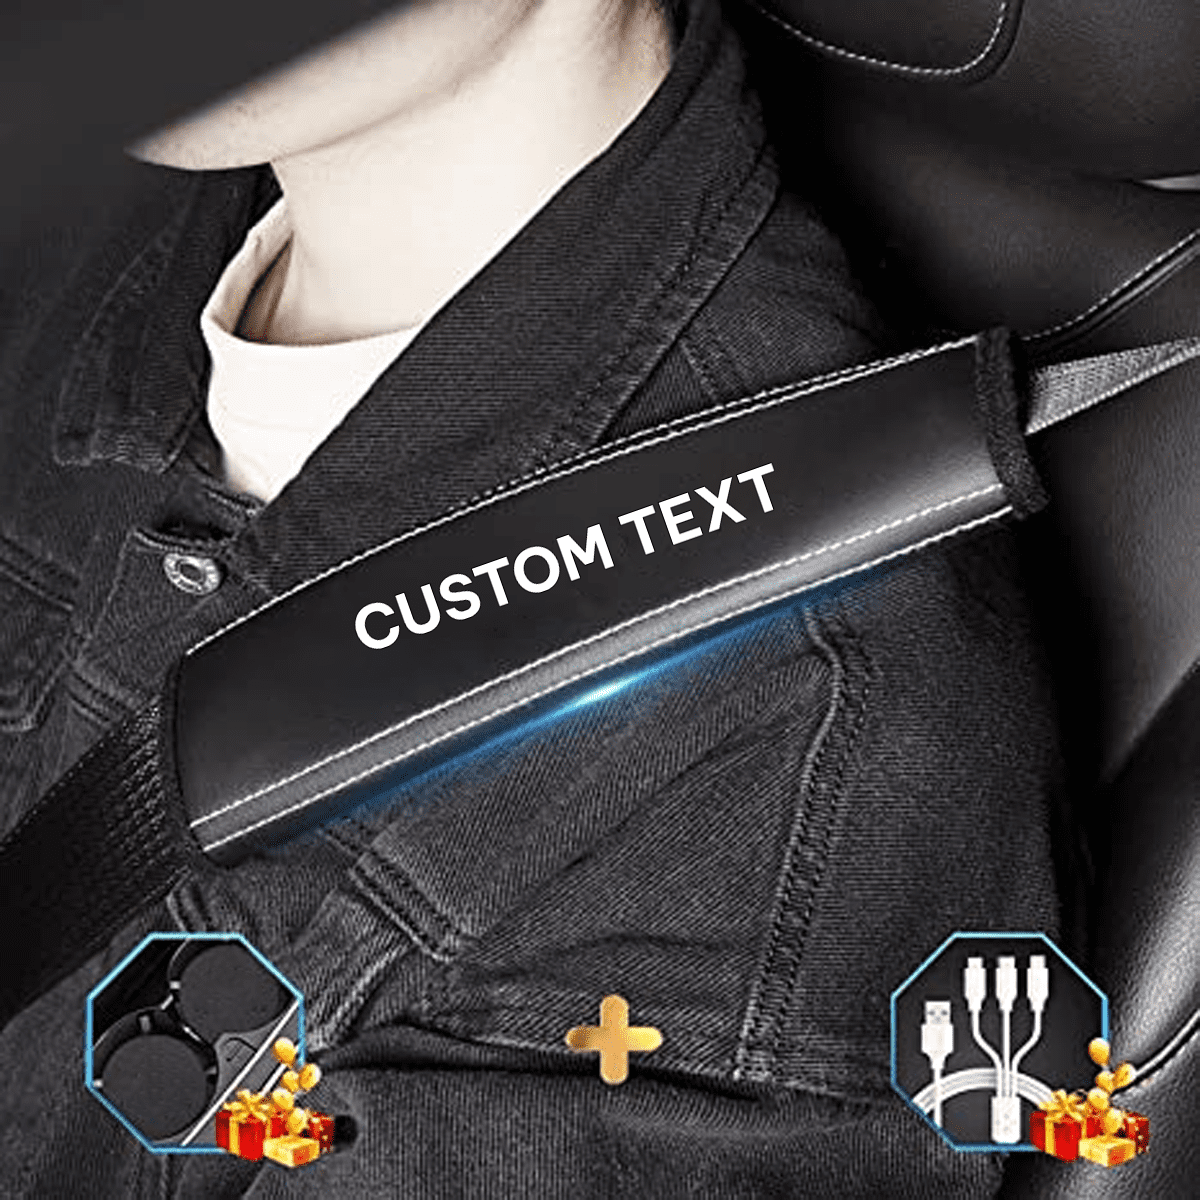 Custom Text and Logo Seat Belt Covers, Microfiber Leather Seat Belt Shoulder Pads for More Comfortable Driving, Set of 2pcs - Delicate Leather